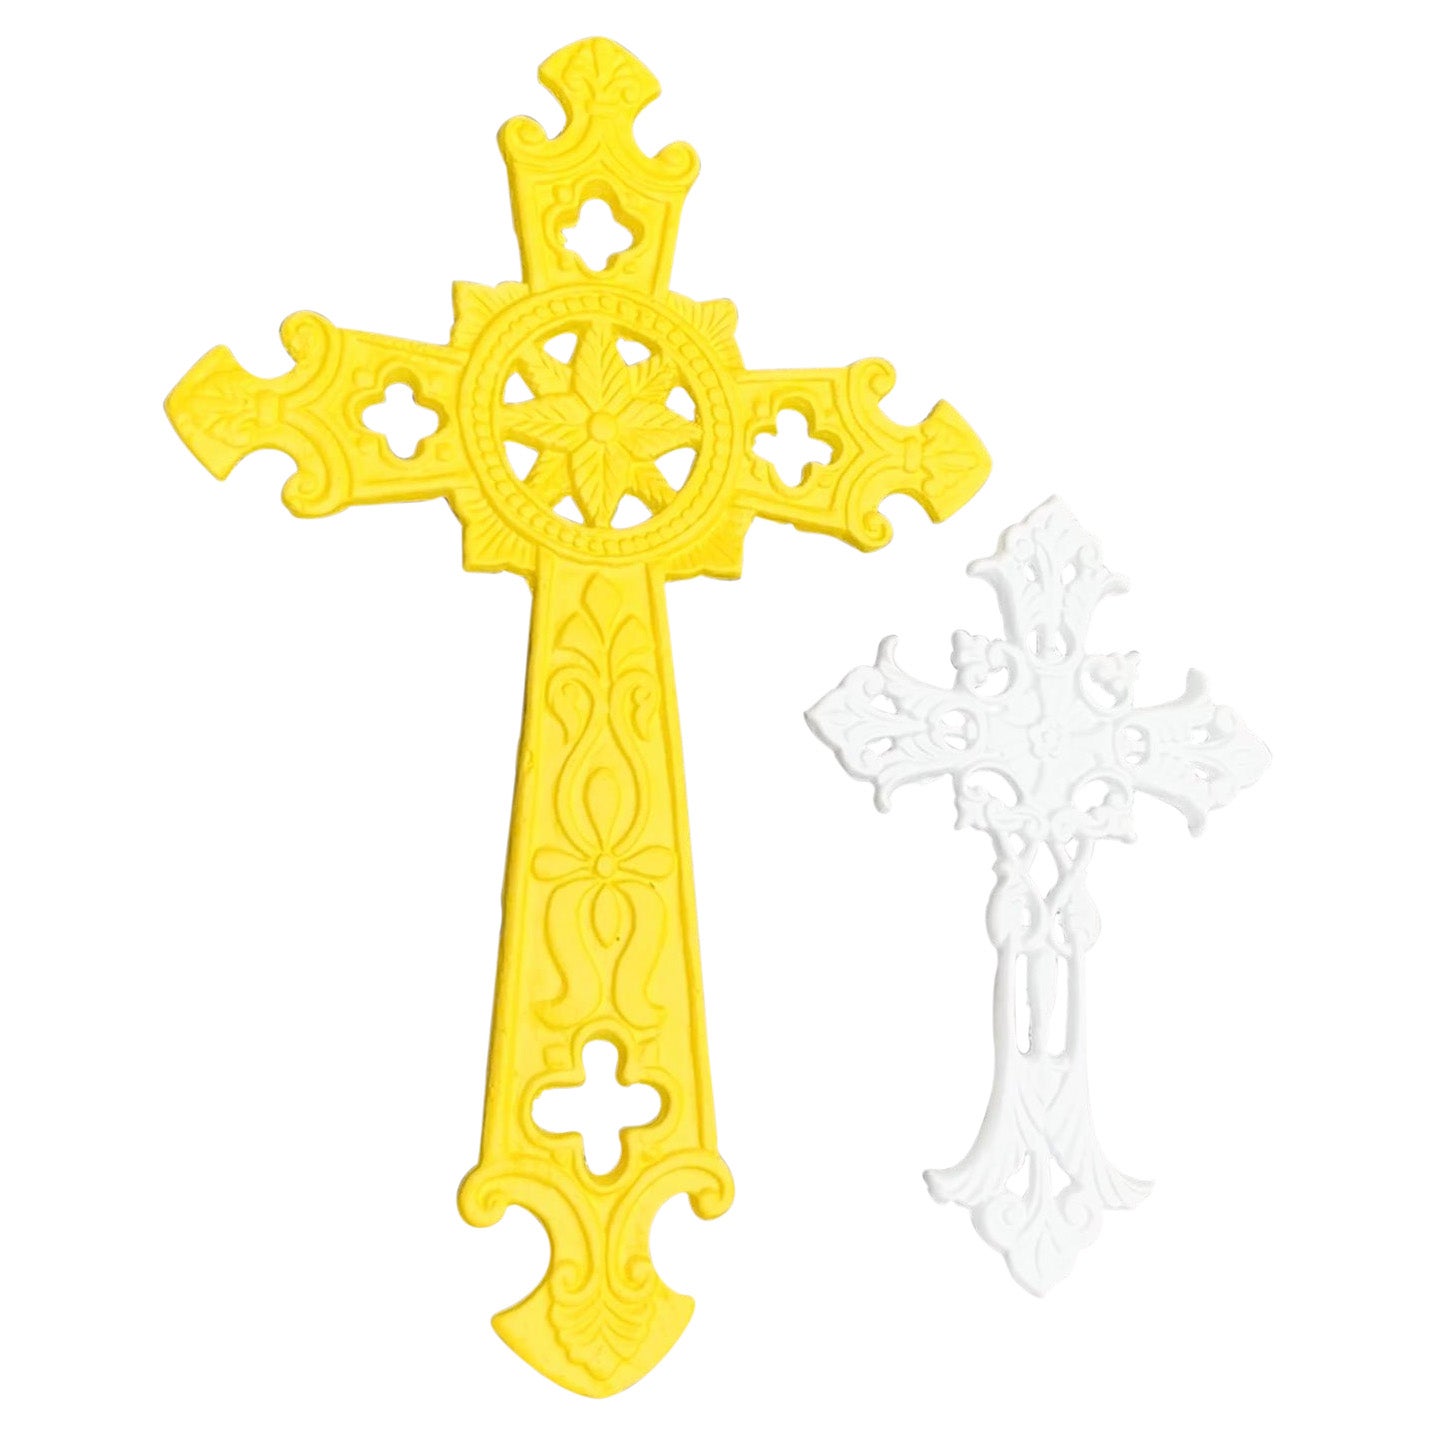 Two Powder-Coated Crucifixes in Yellow and White